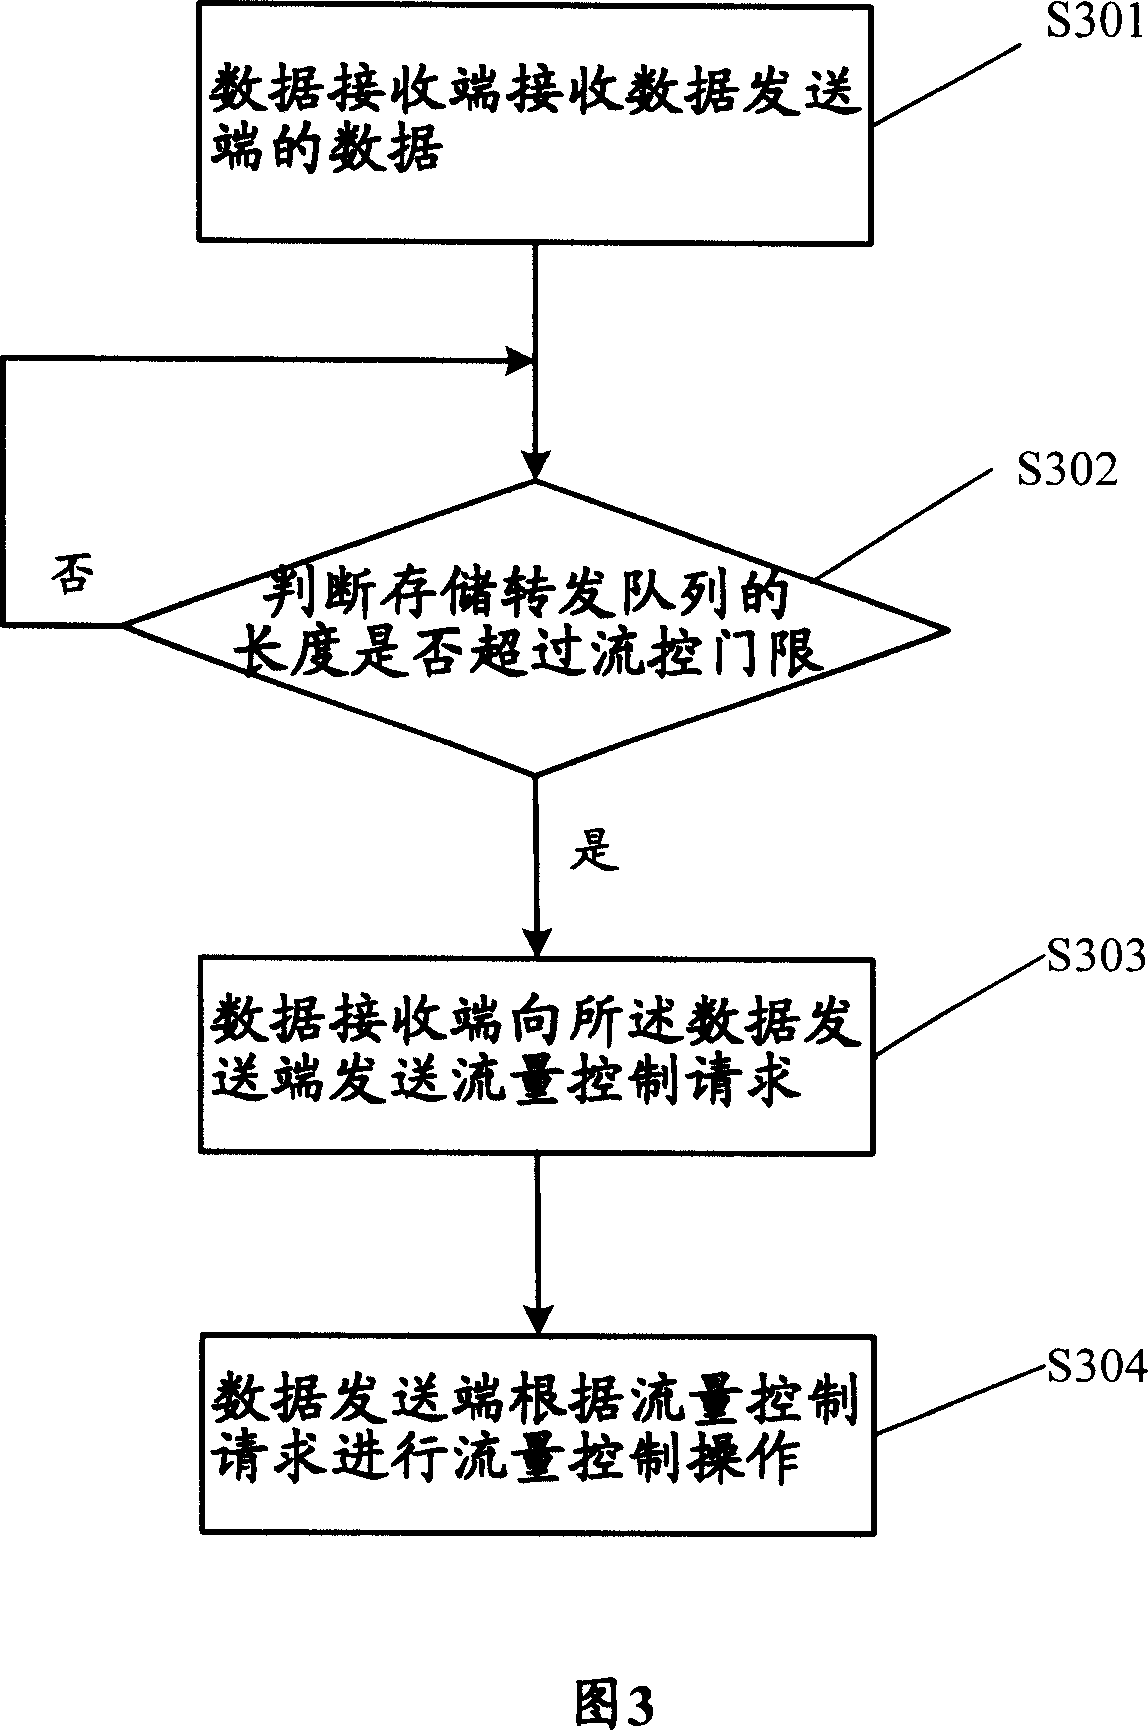 Method for controlling network data flow of global microwave access inter-operation